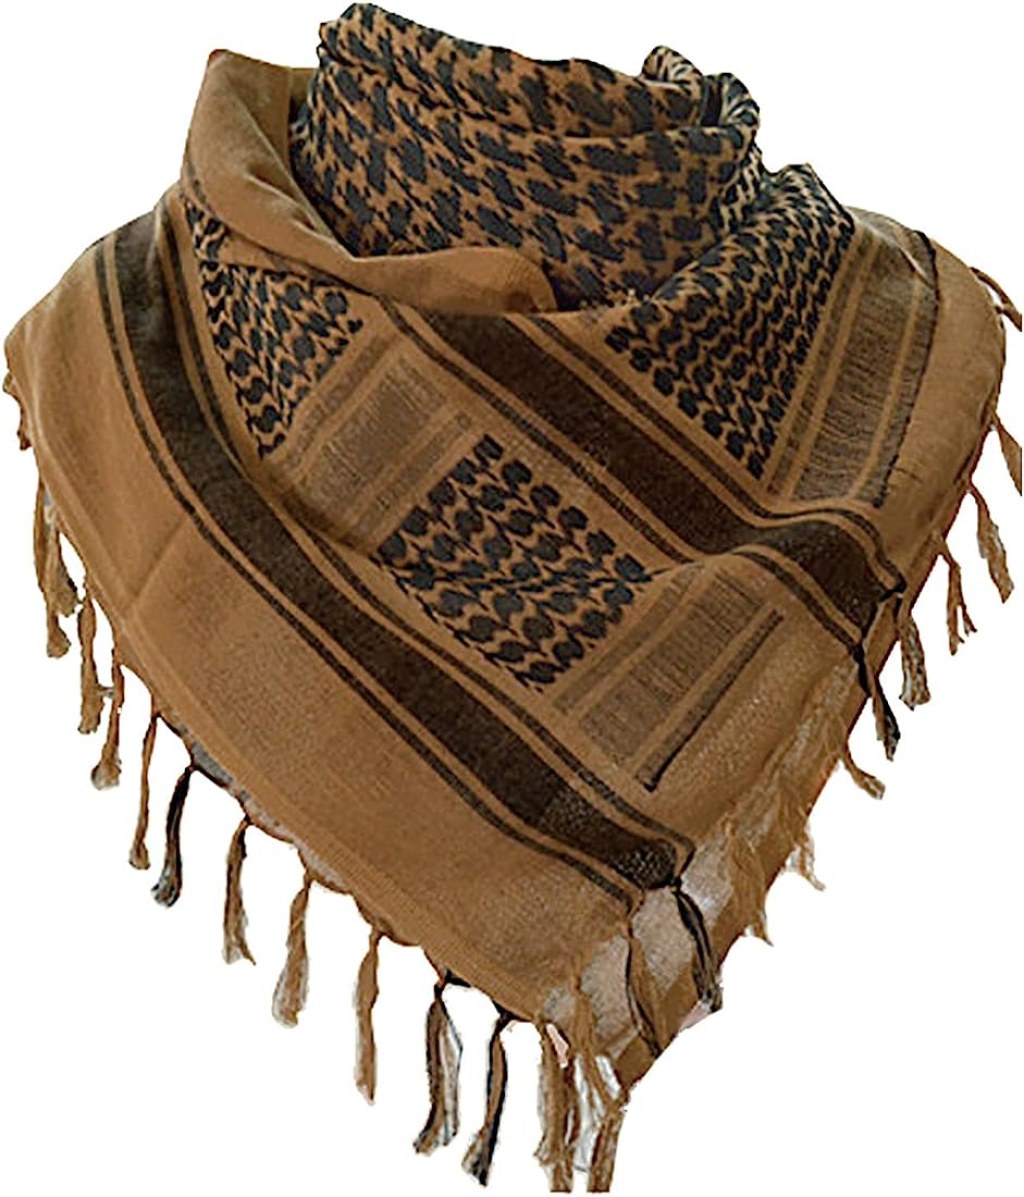 Picture of: Keffiyeh Military Shemagh Scarf % Cotton